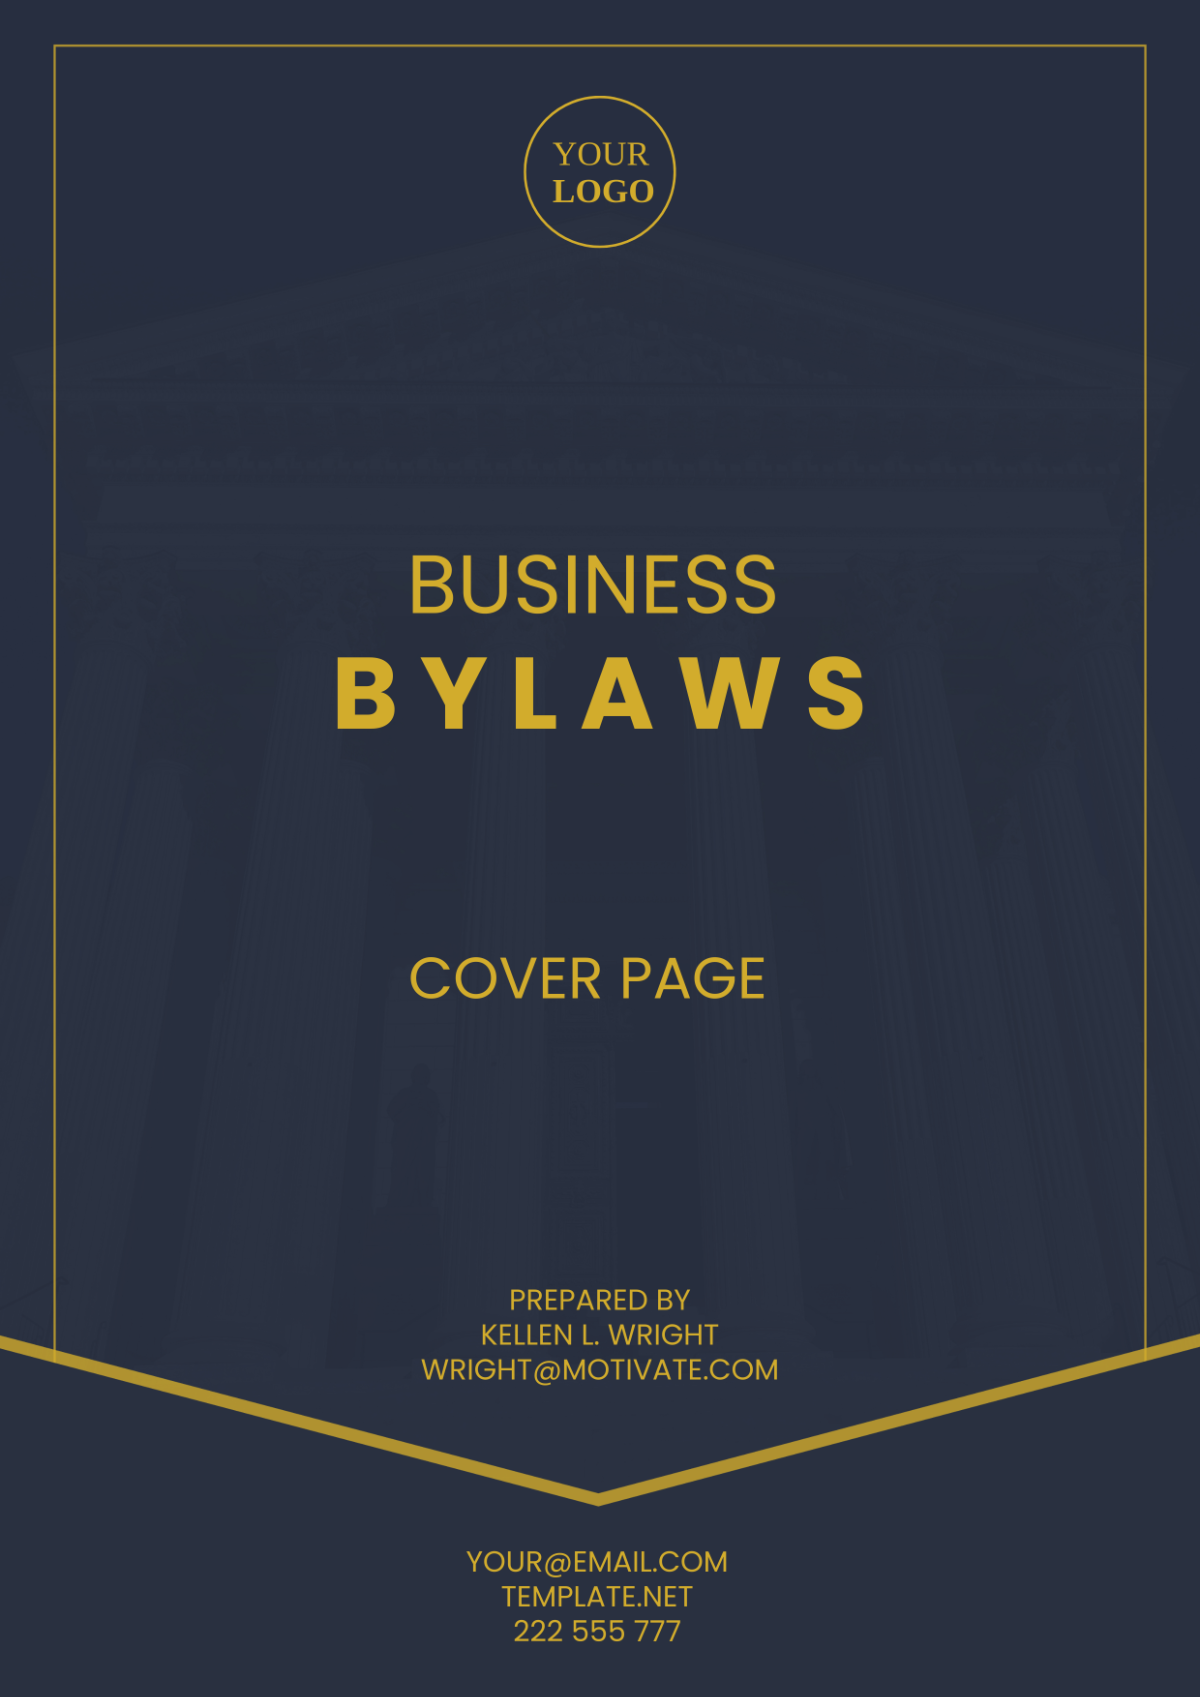 Business Bylaws Cover Page